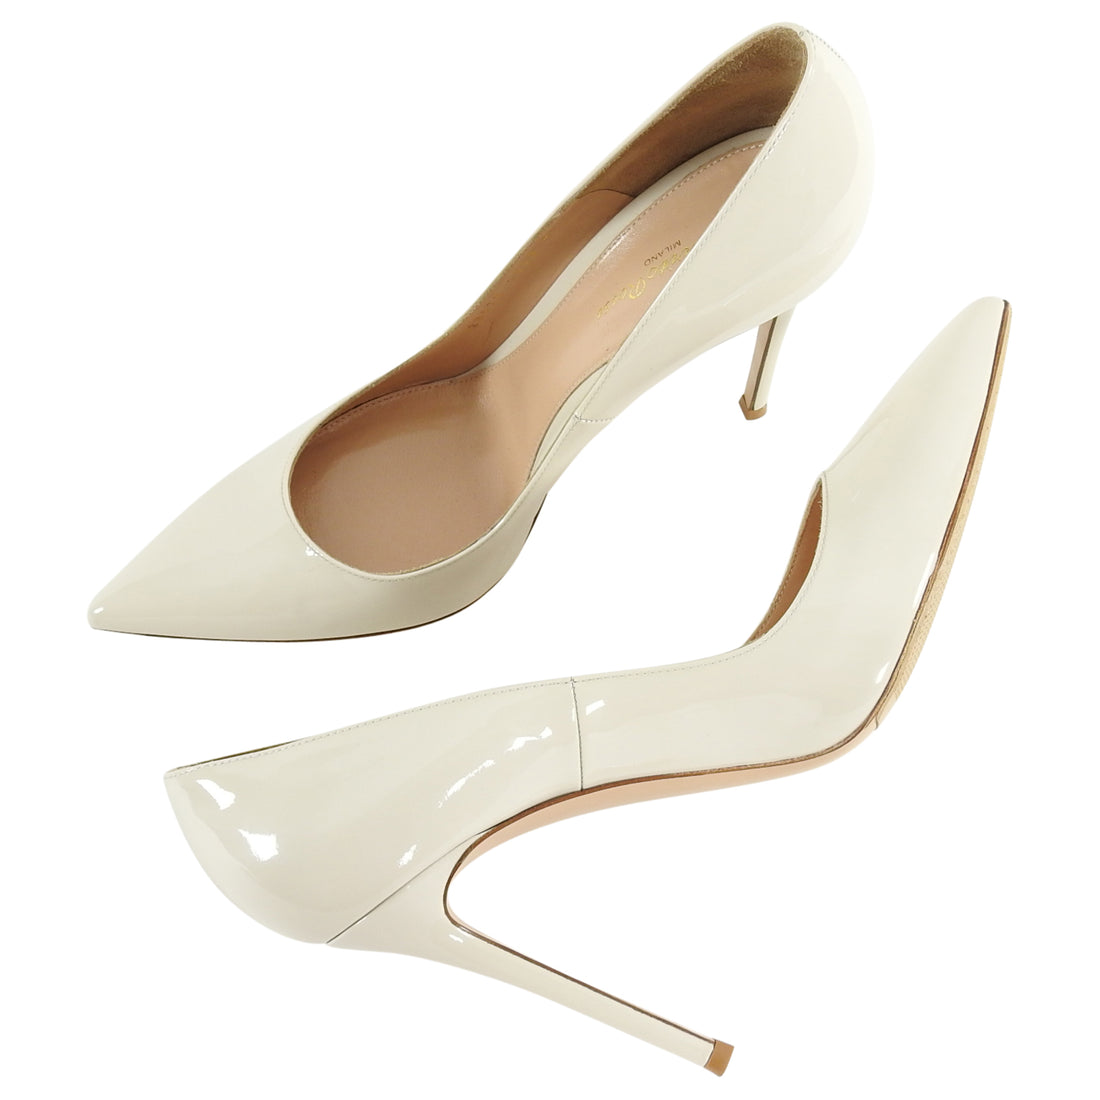 Gianvito Rossi 115mm Ivory Patent Leather Pumps Heels - 41